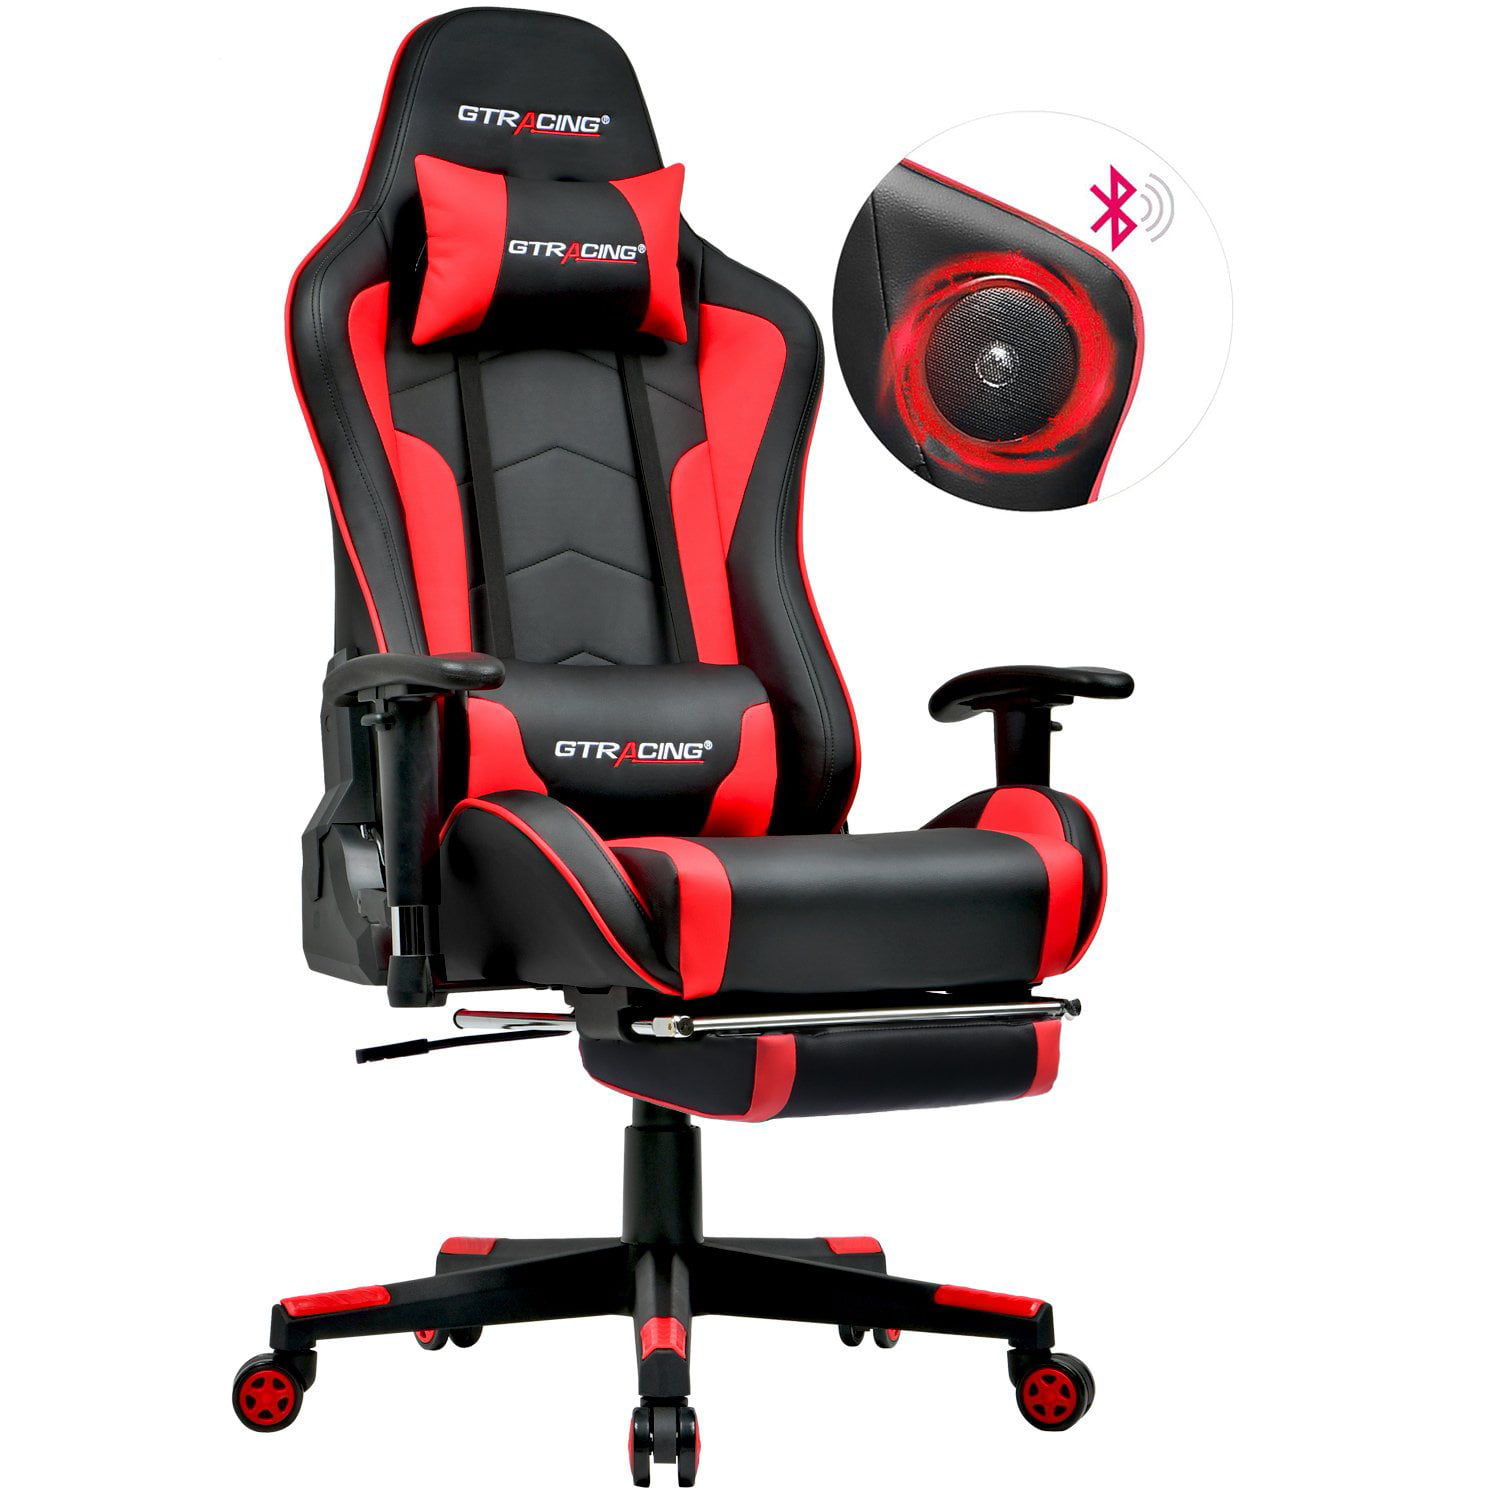 Gtracing Gaming Chair with Speakers Bluetooth and Footrest